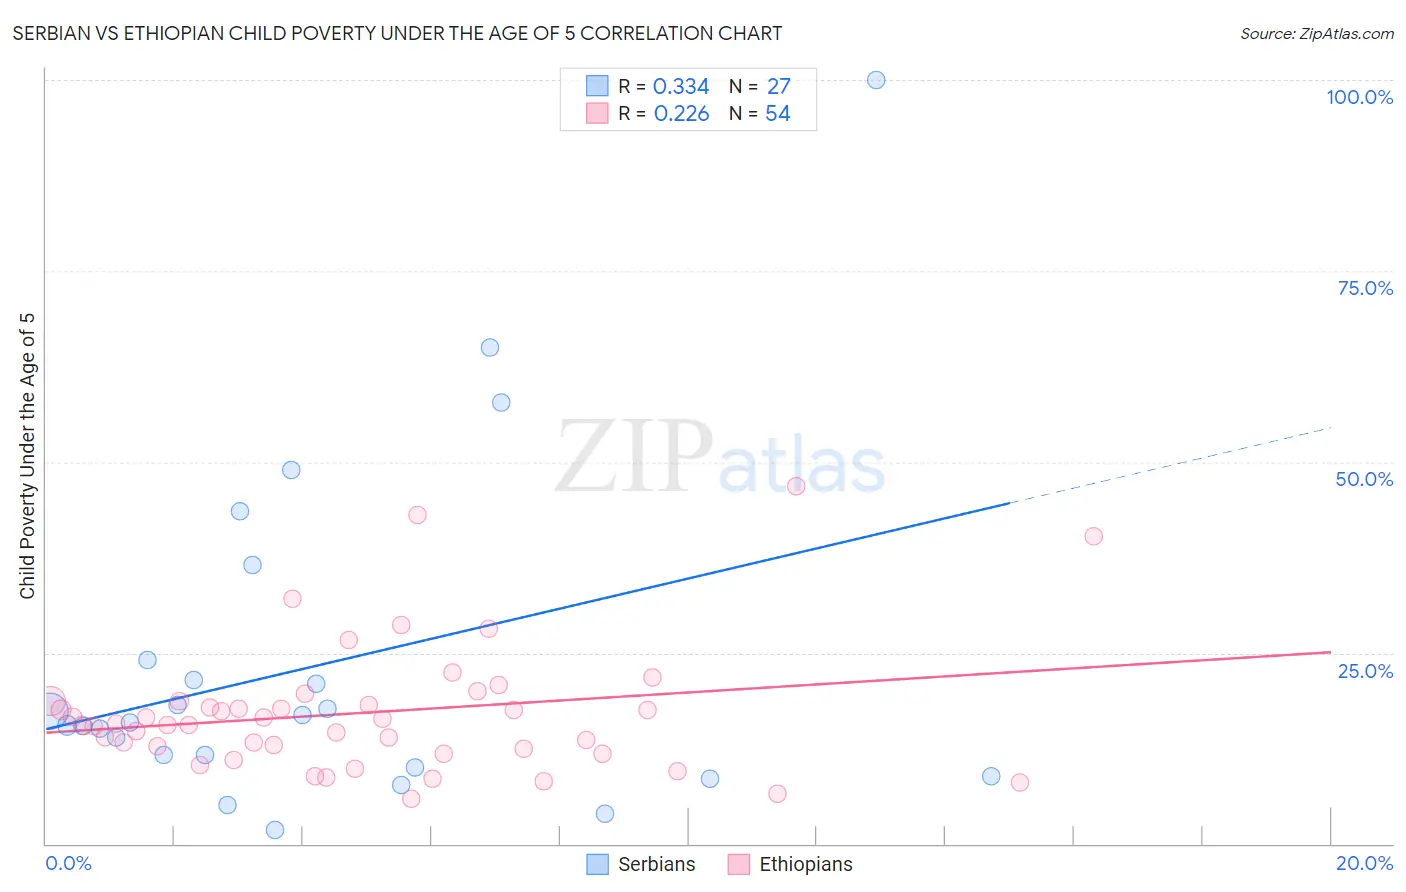 Serbian vs Ethiopian Child Poverty Under the Age of 5